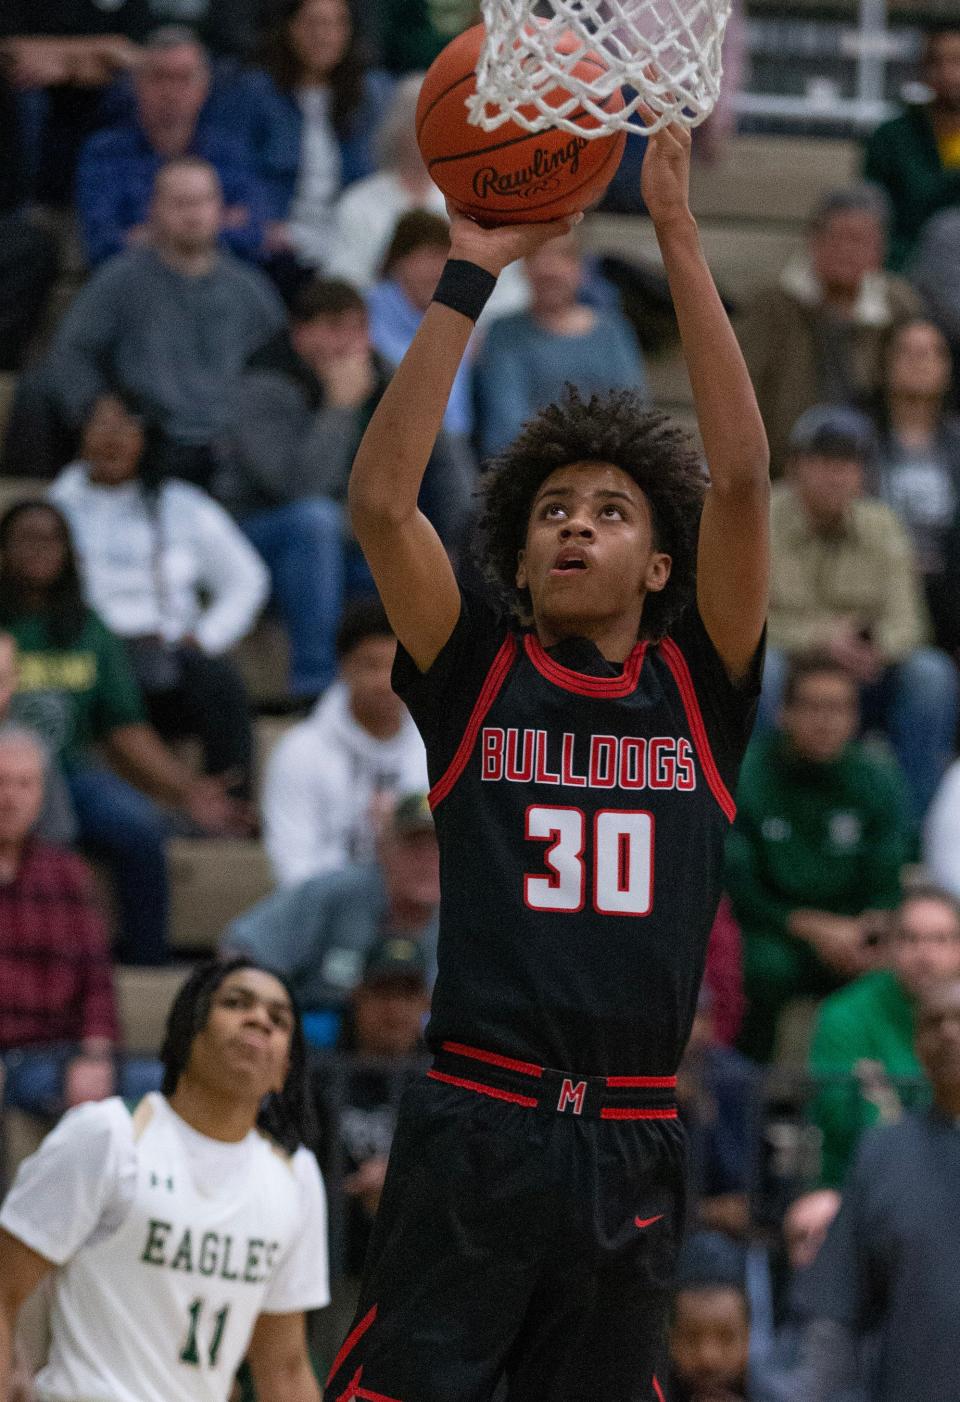 McKinley's Reed Sims Jr. (30) scores as GlenOak's Kenny Scott looks on during a boys high school basketball game on Tuesday, January 24, 2023.